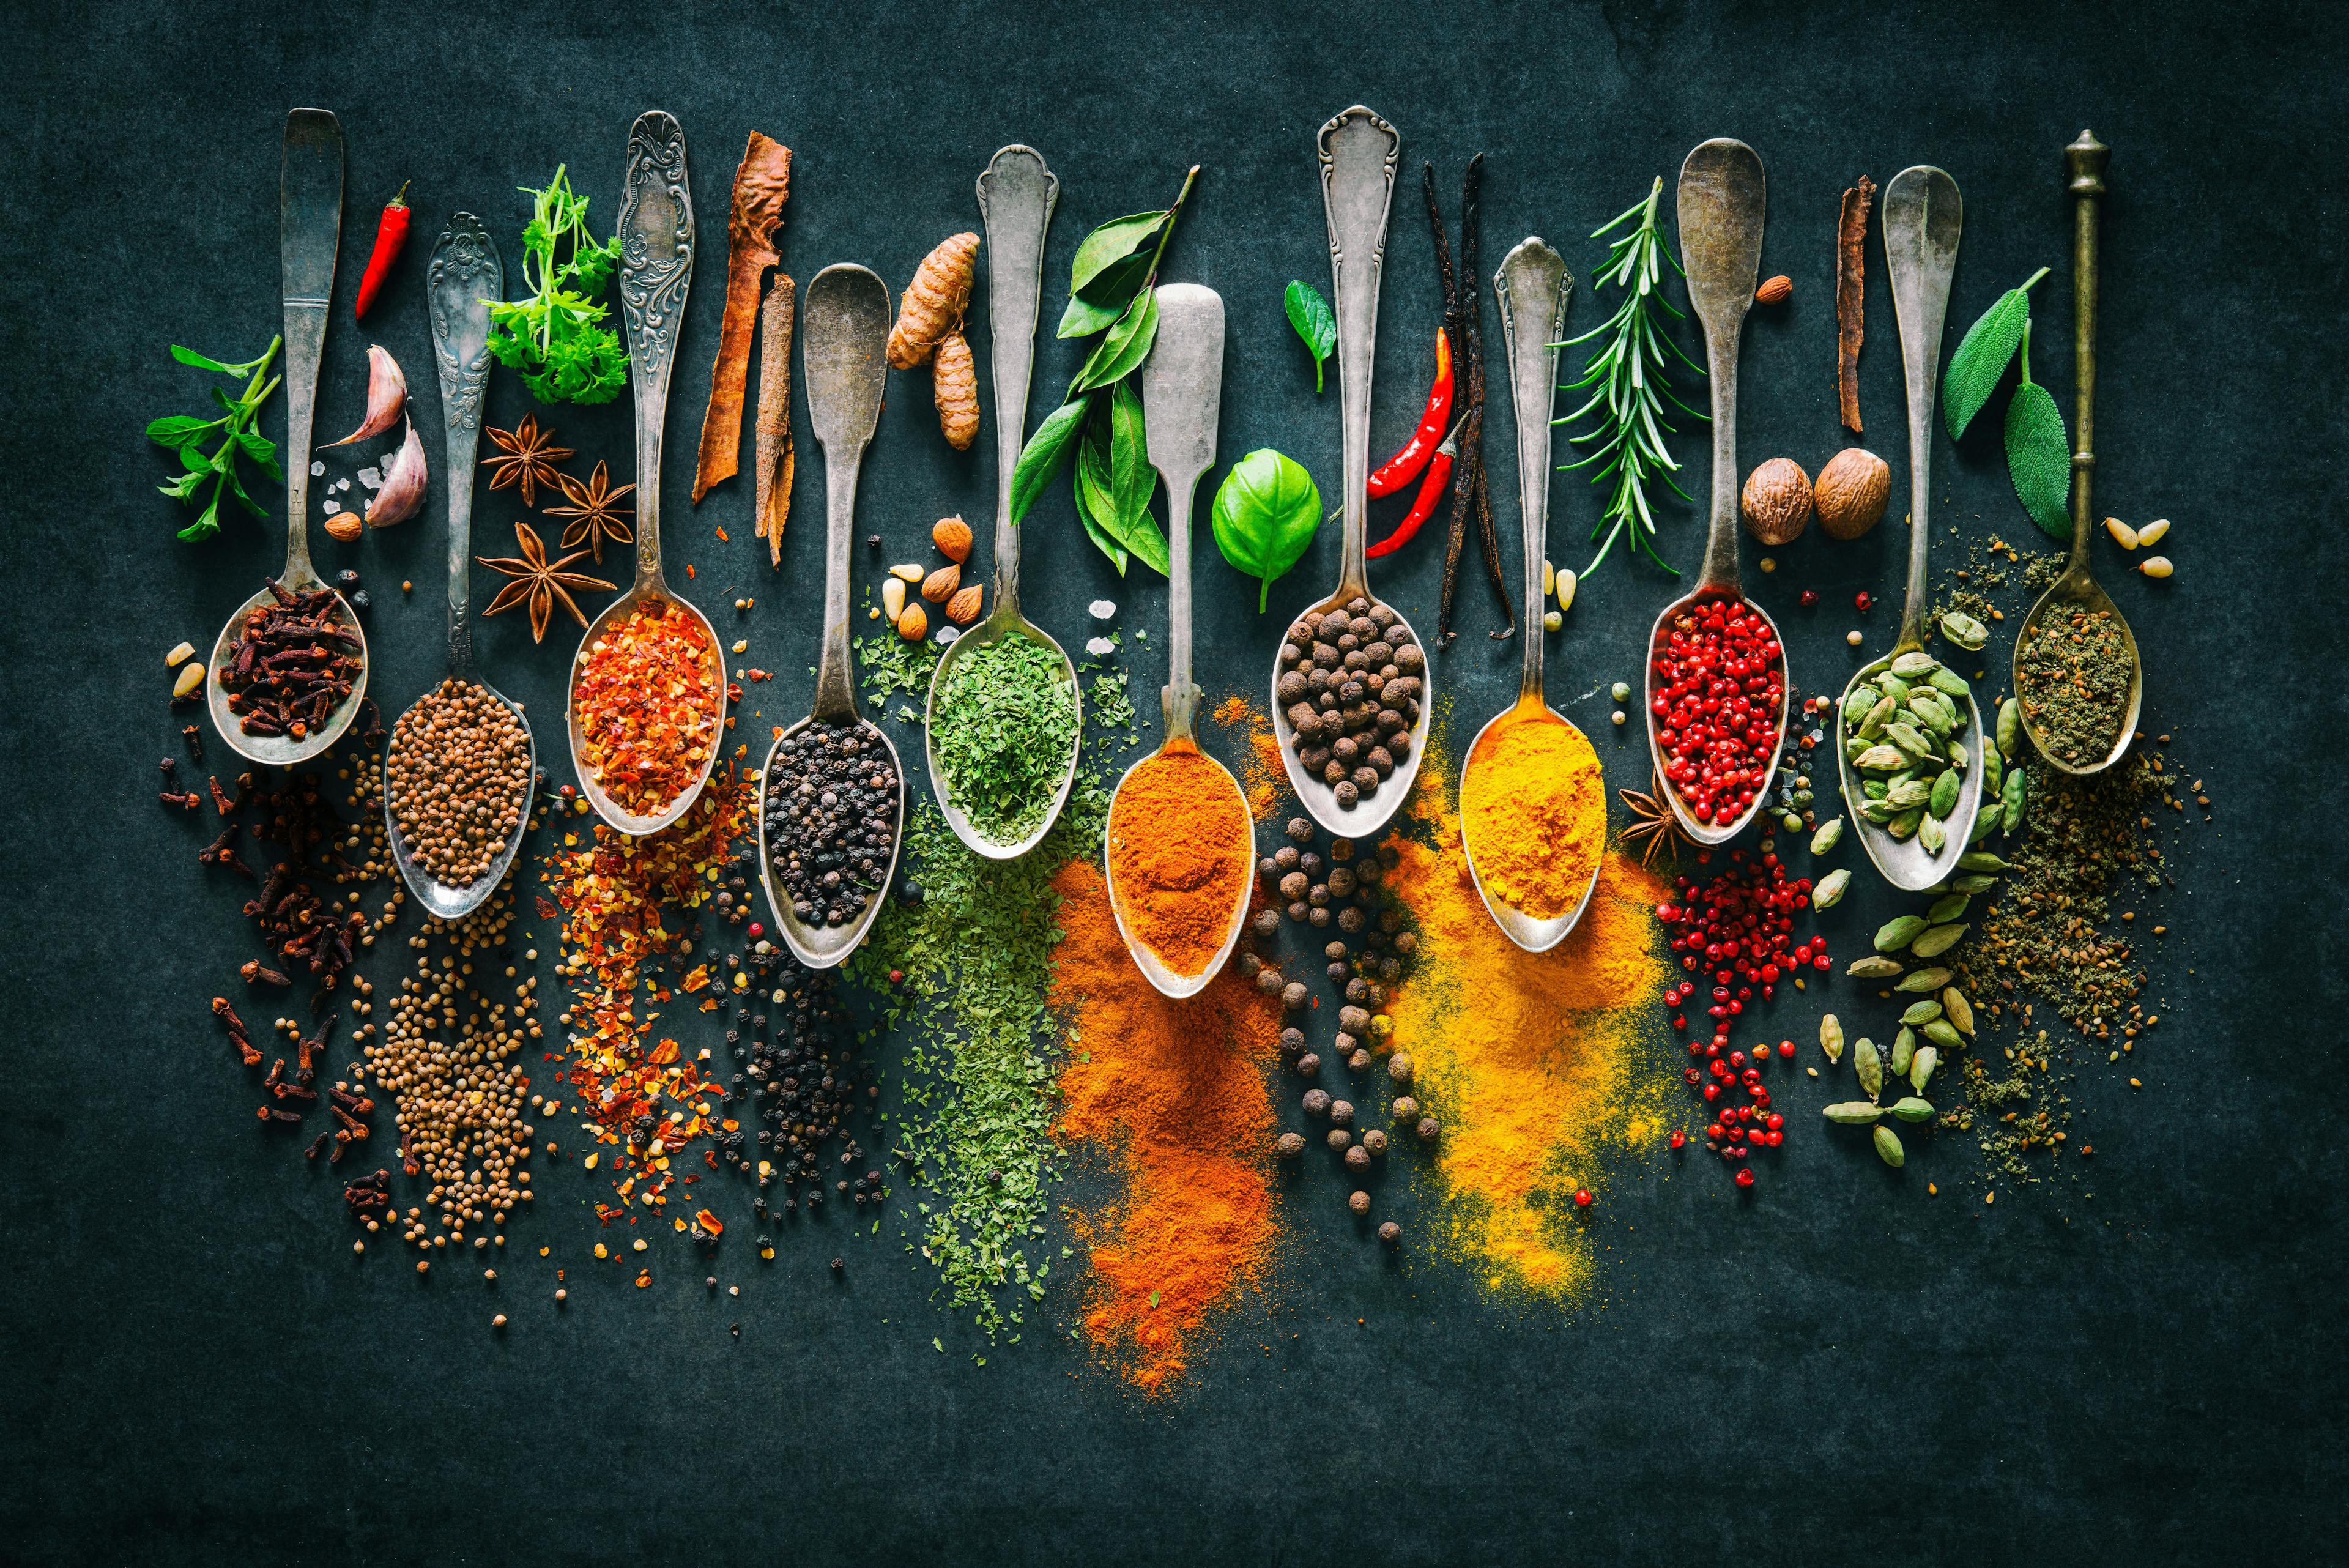 Herbs and spices for cooking on dark background | Image Credit: © Alexander Raths - stock.adobe.com